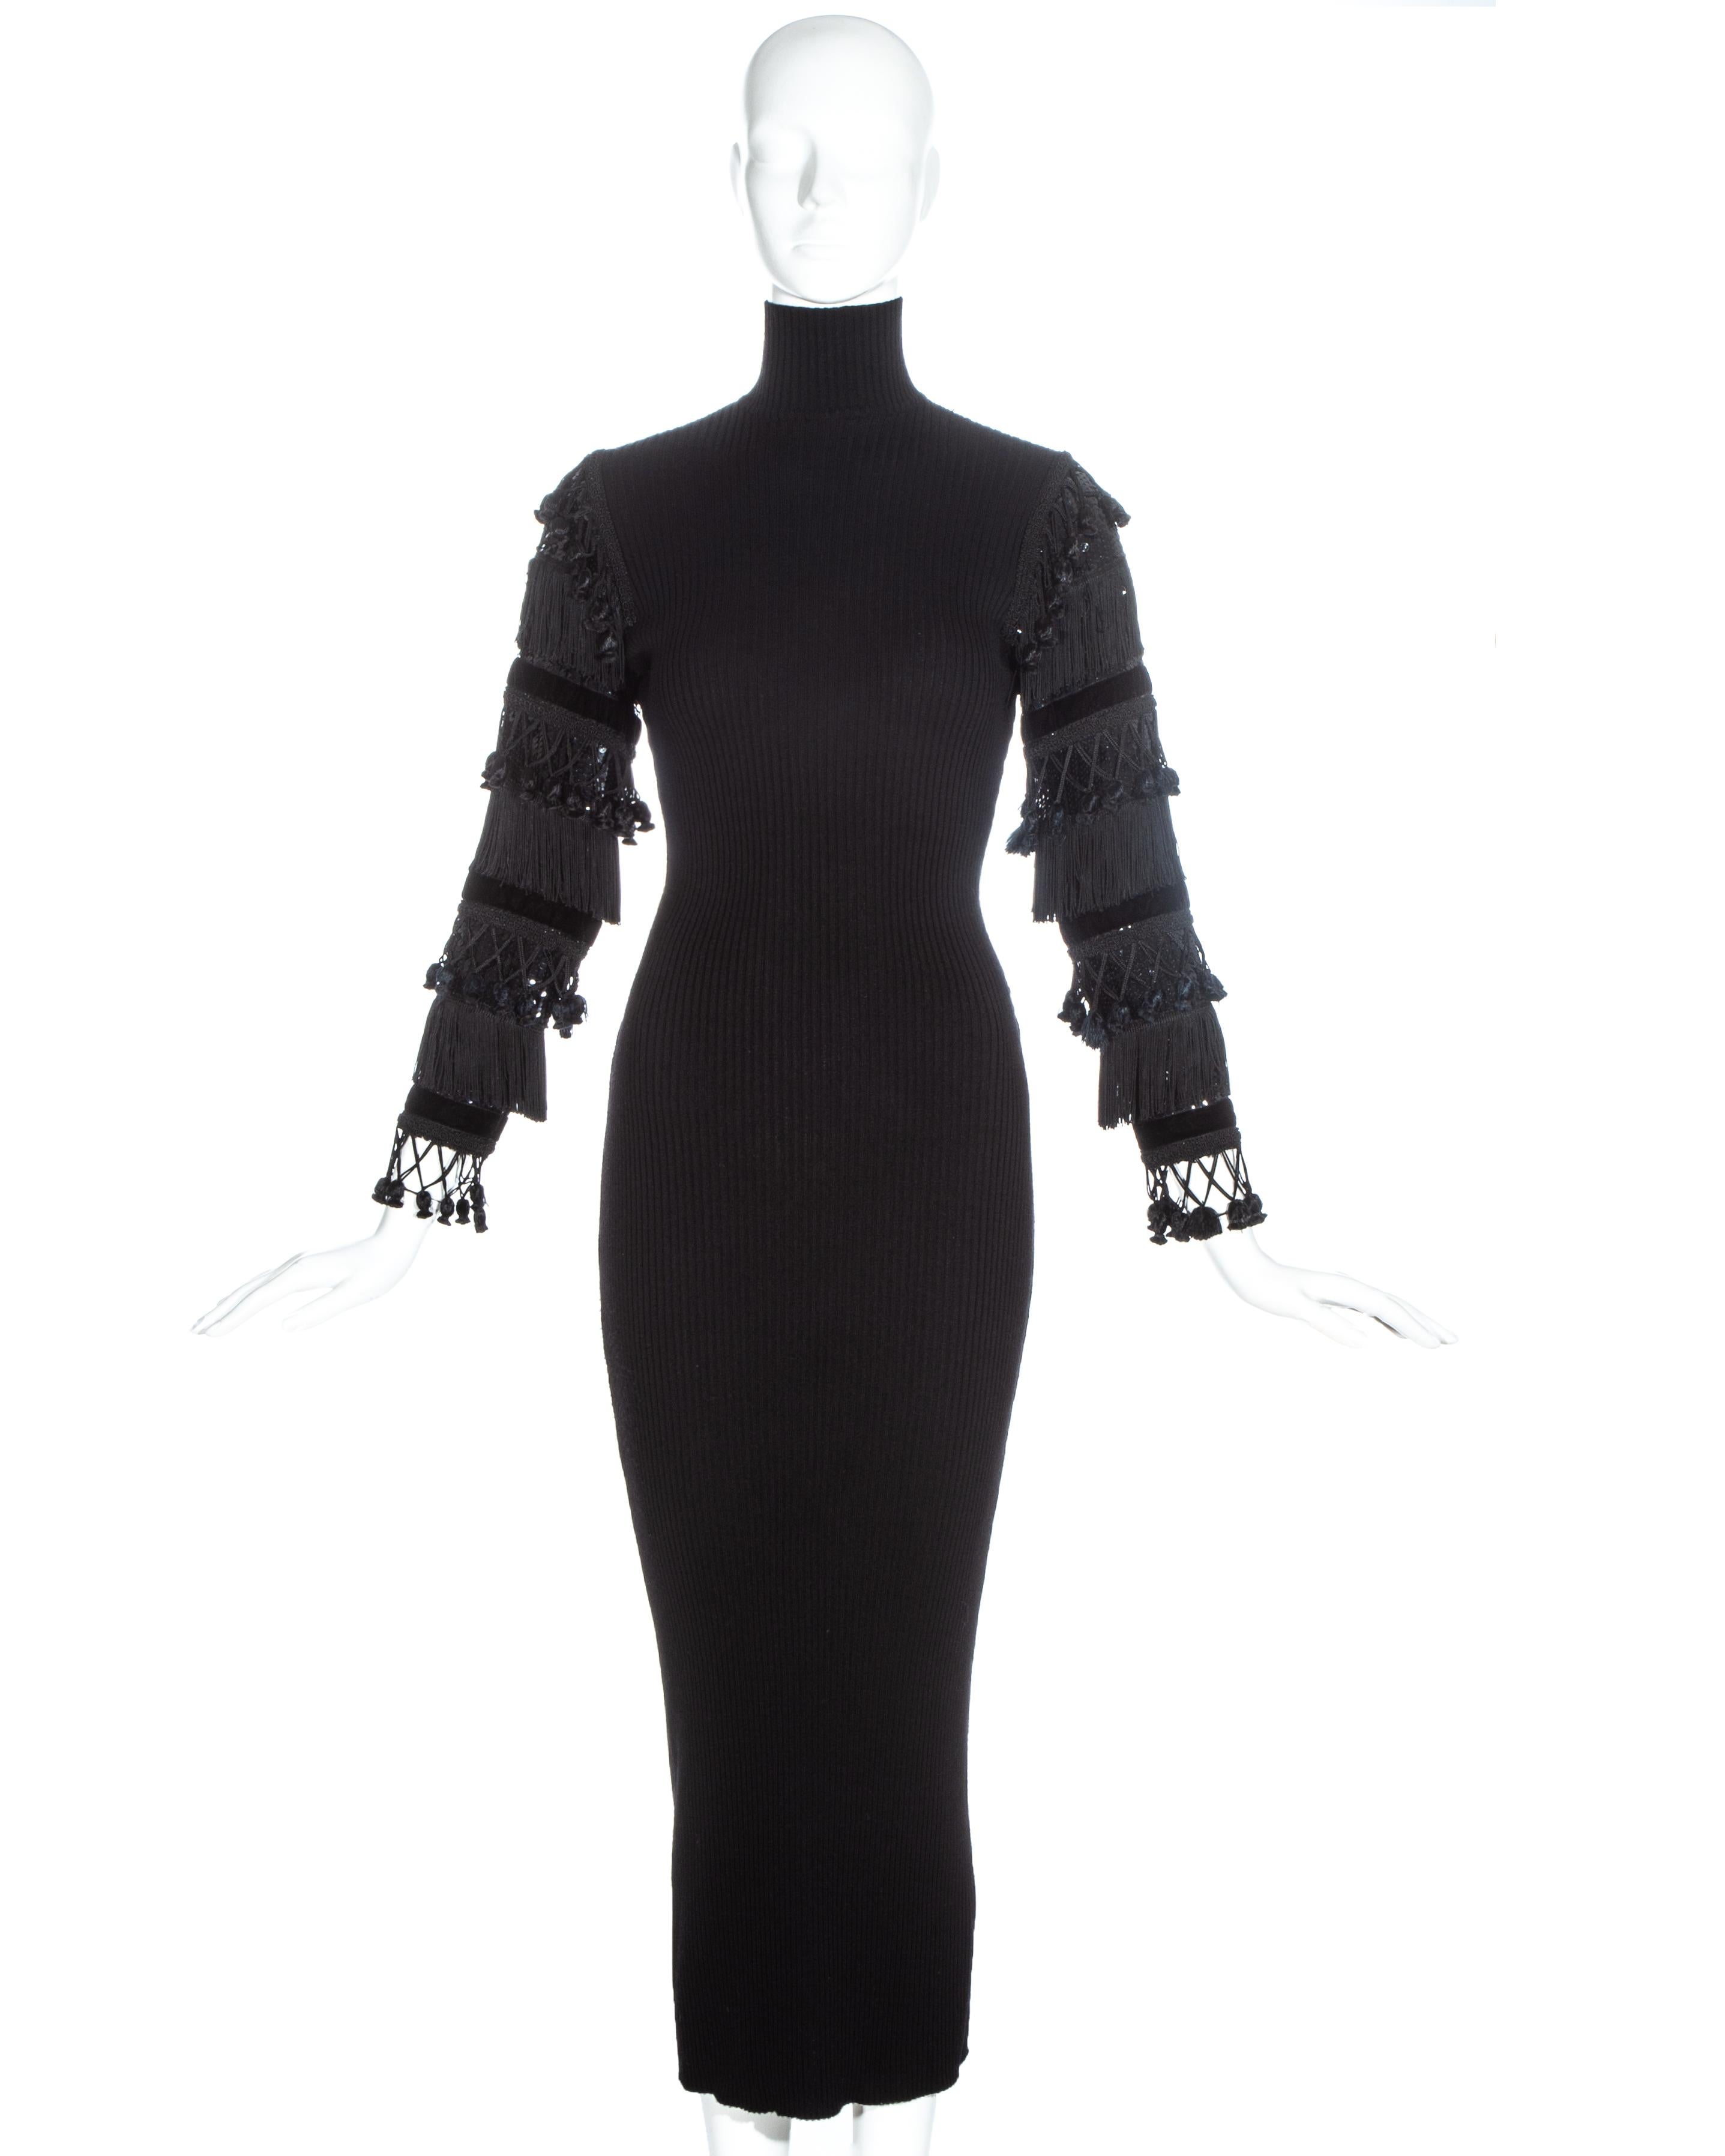 Jean Paul Gaultier black ribbed wool turtle neck maxi dress with velvet, sequin and tasseled sleeves.

Fall-Winter 1985